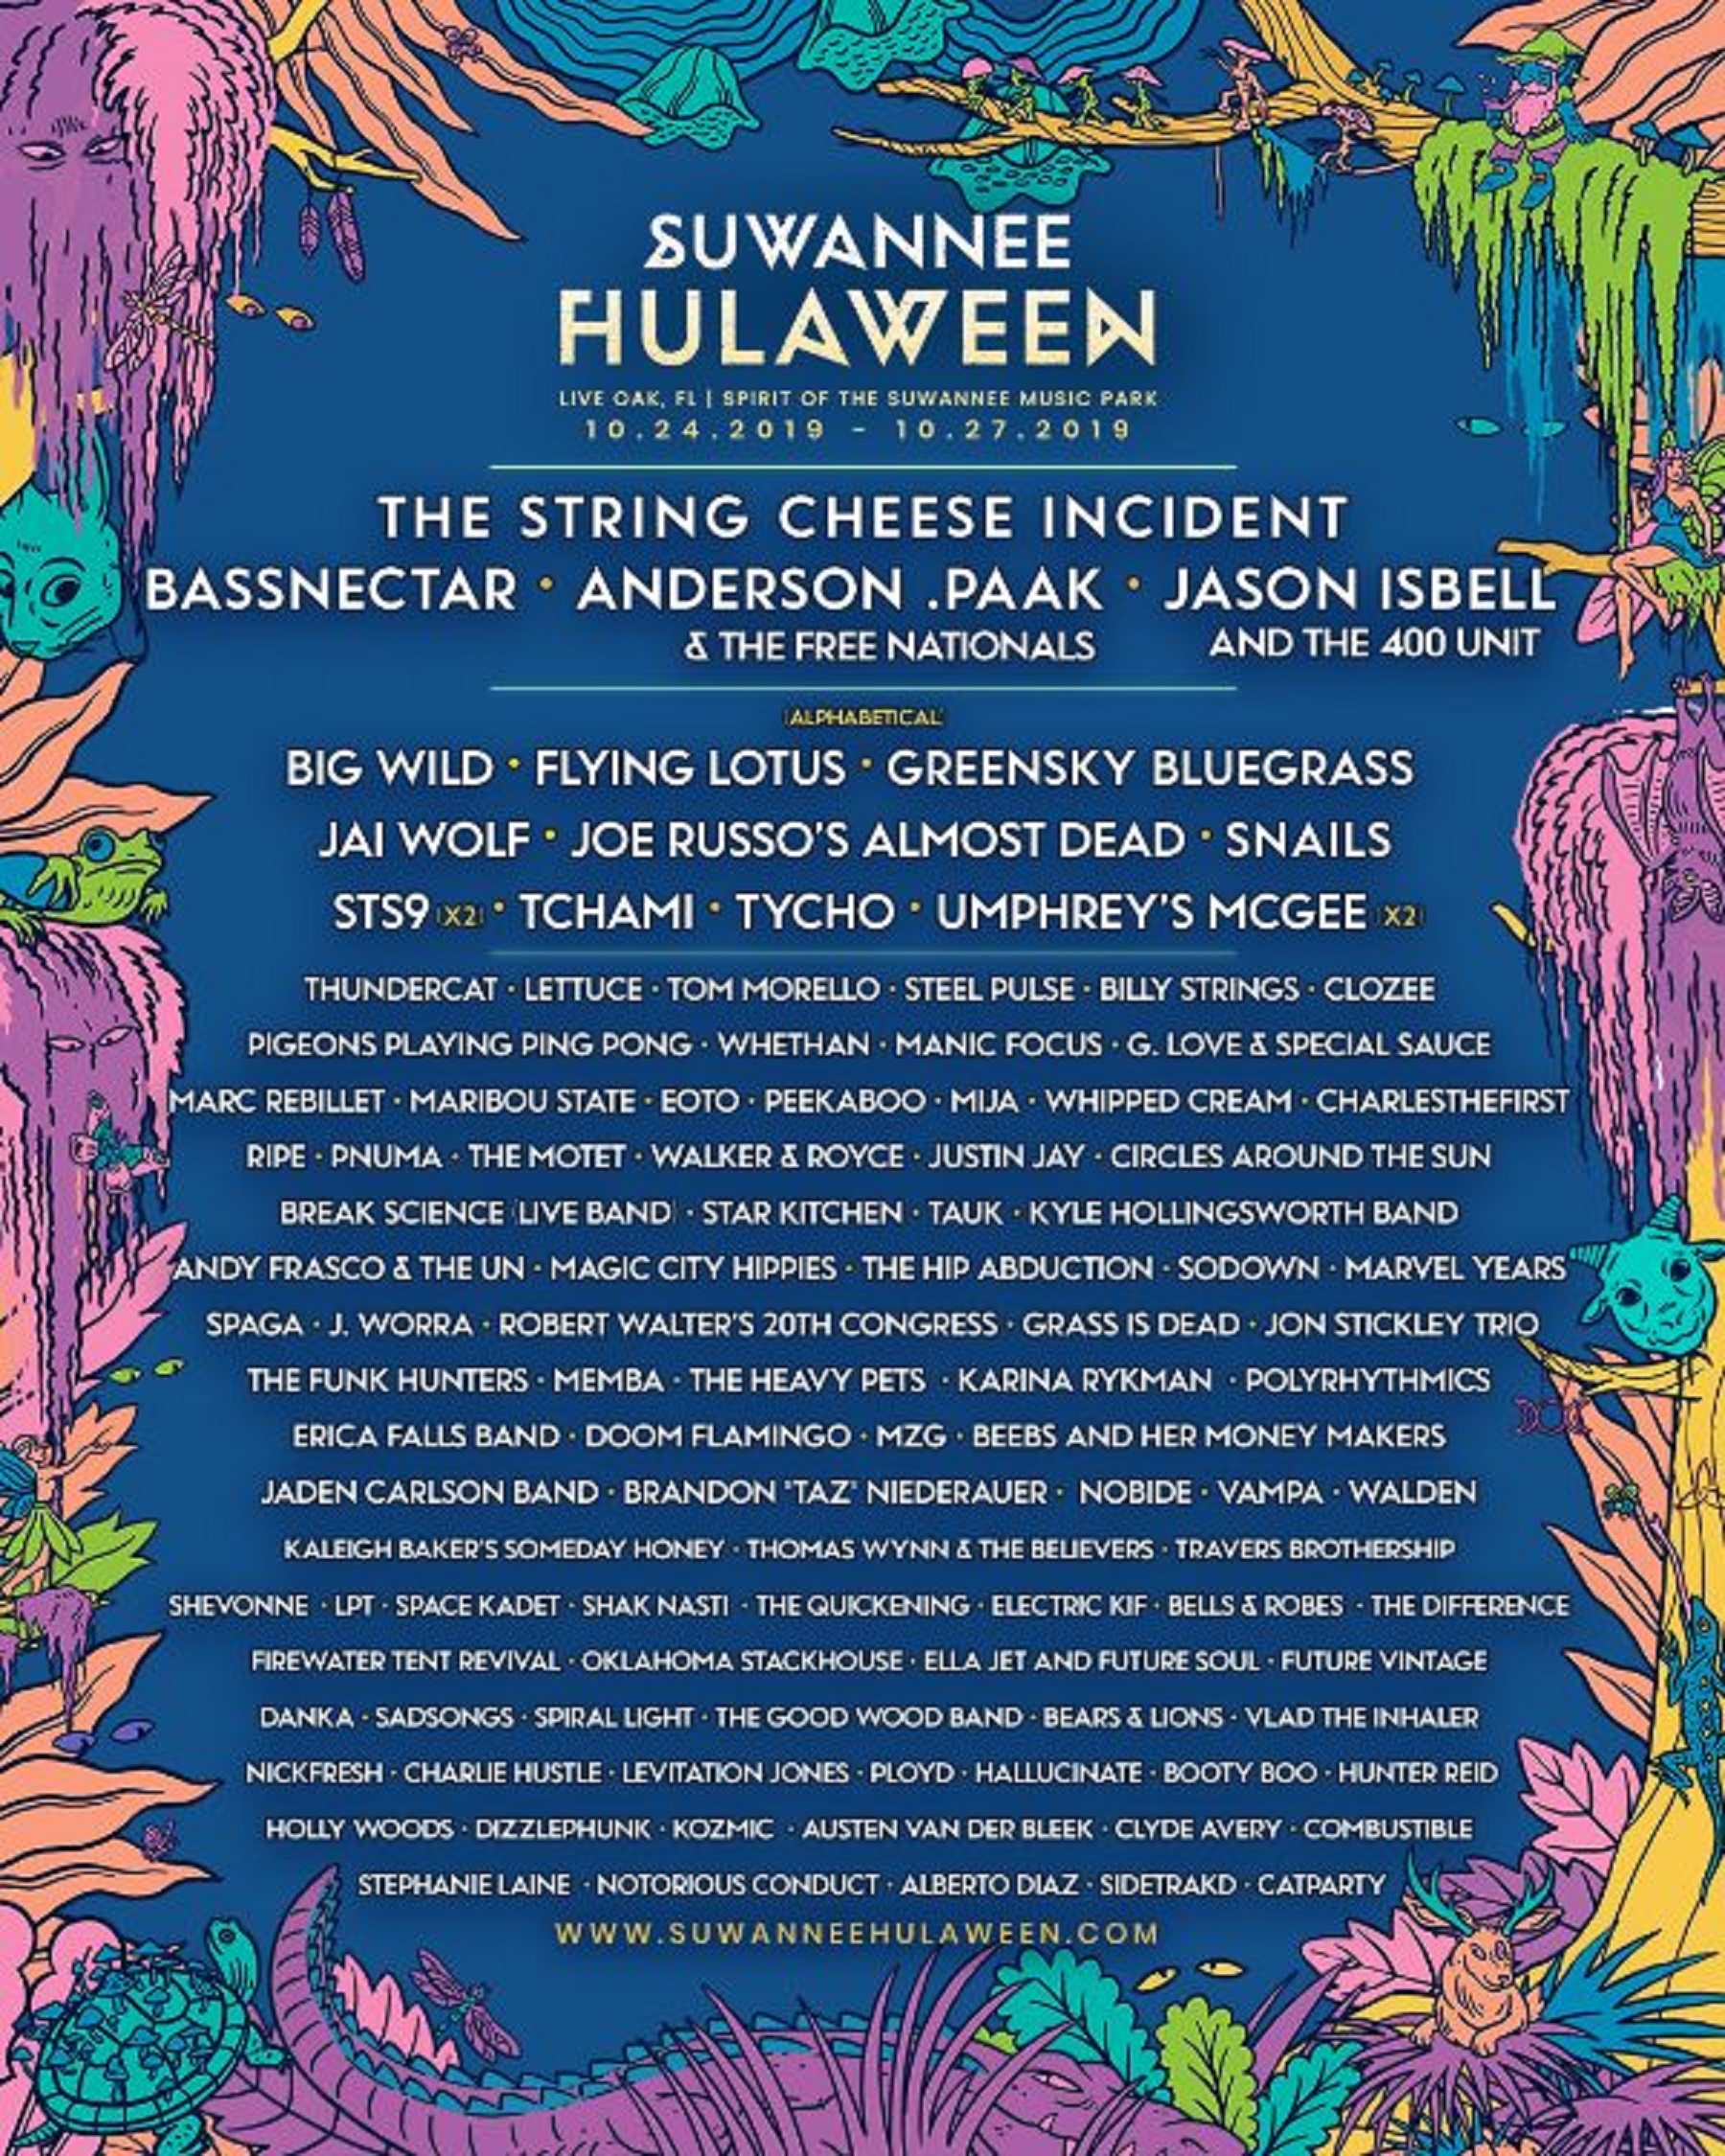 Hulaween 2022 Schedule Suwannee Hulaween To Bring Thousands To Spirit Of The Suwannee Music Park  Oct. 24-27 | Grateful Web